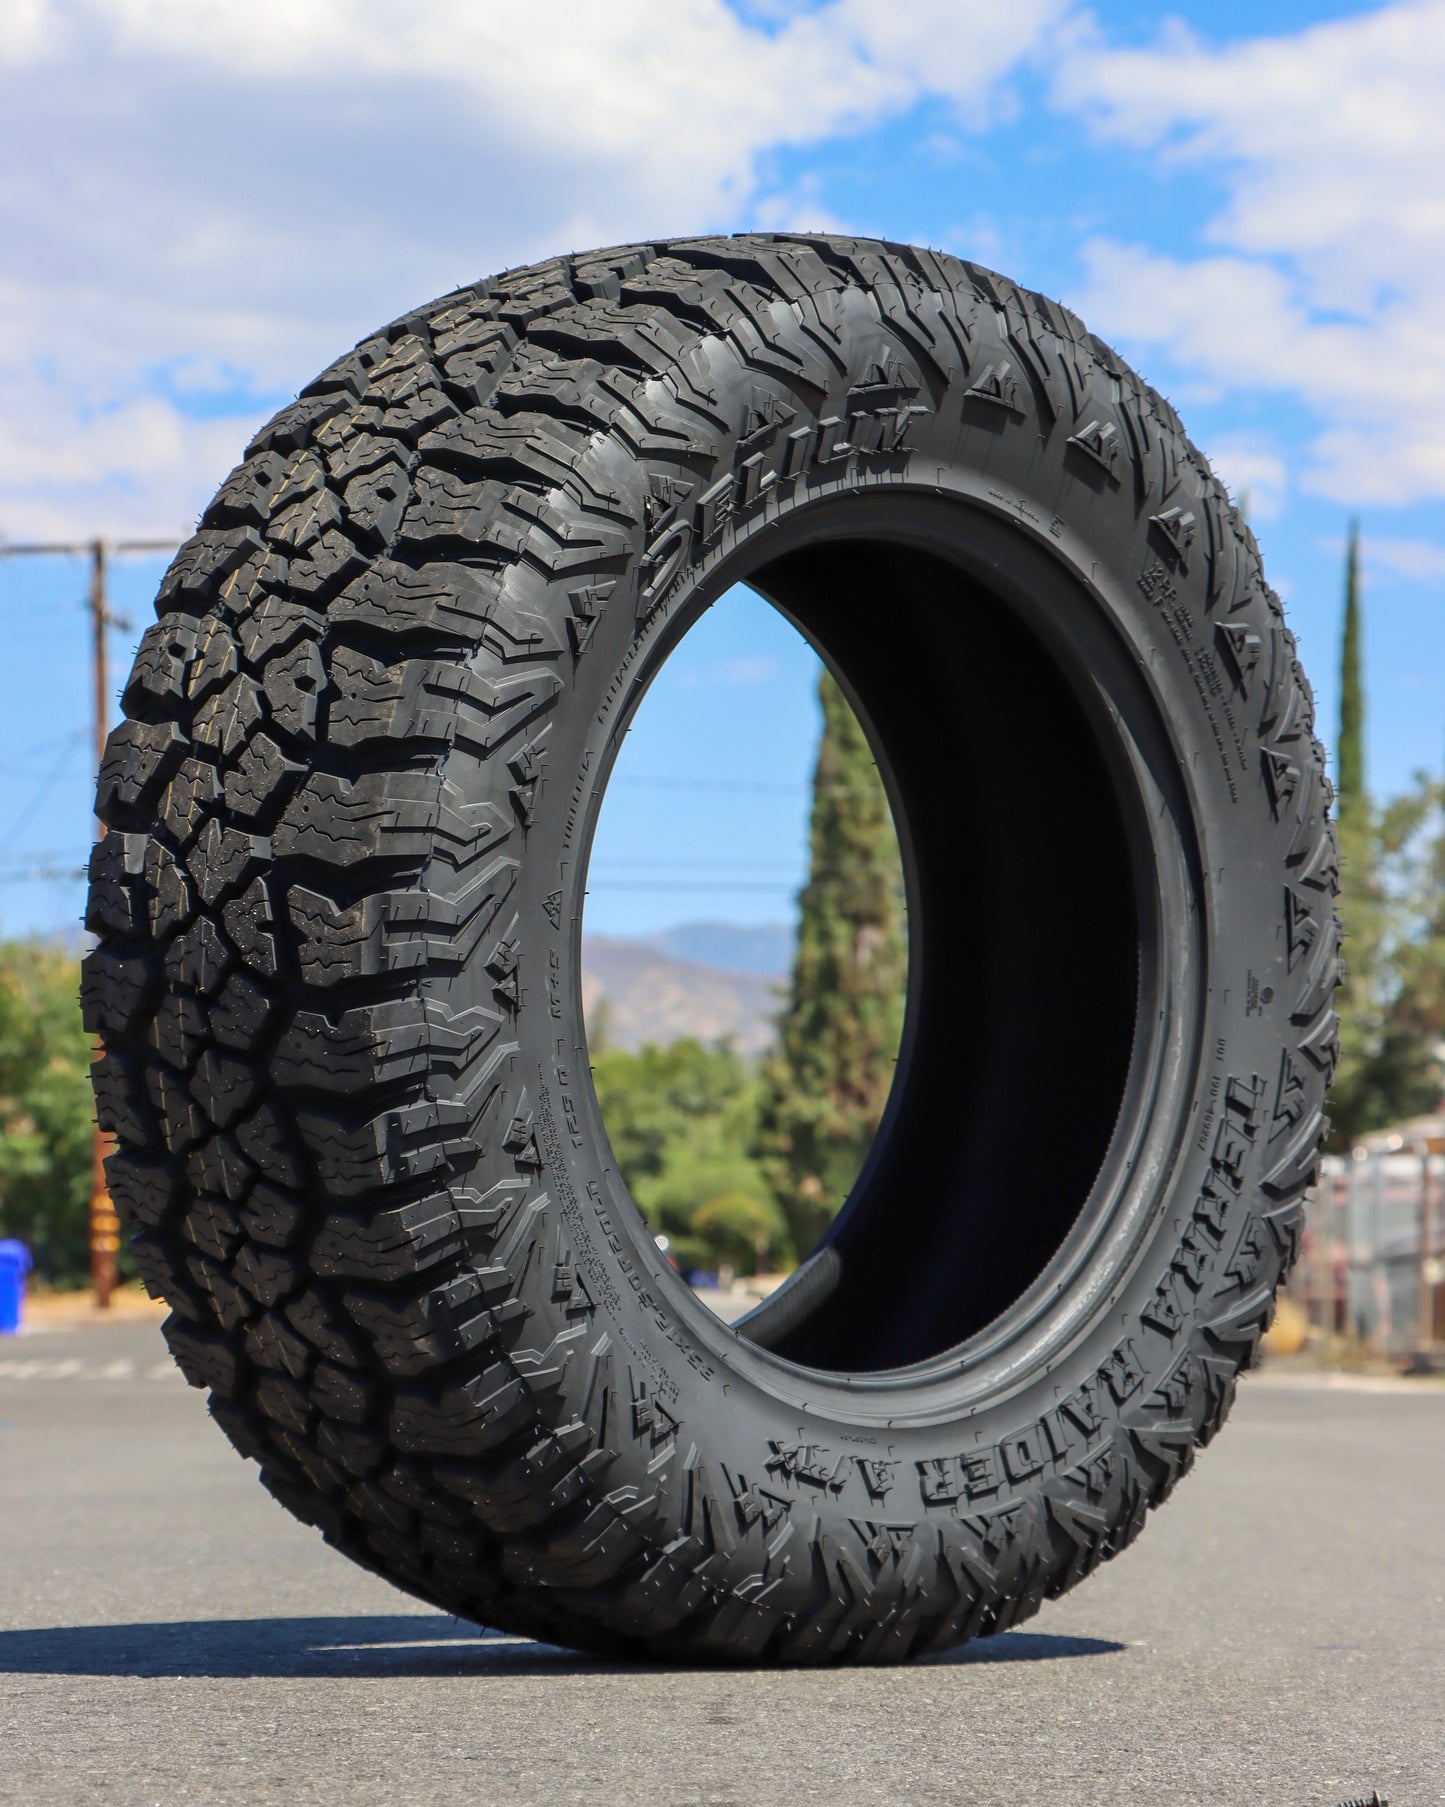 Delium Terra Raider All Terrain Tire on display in the middle of the street.